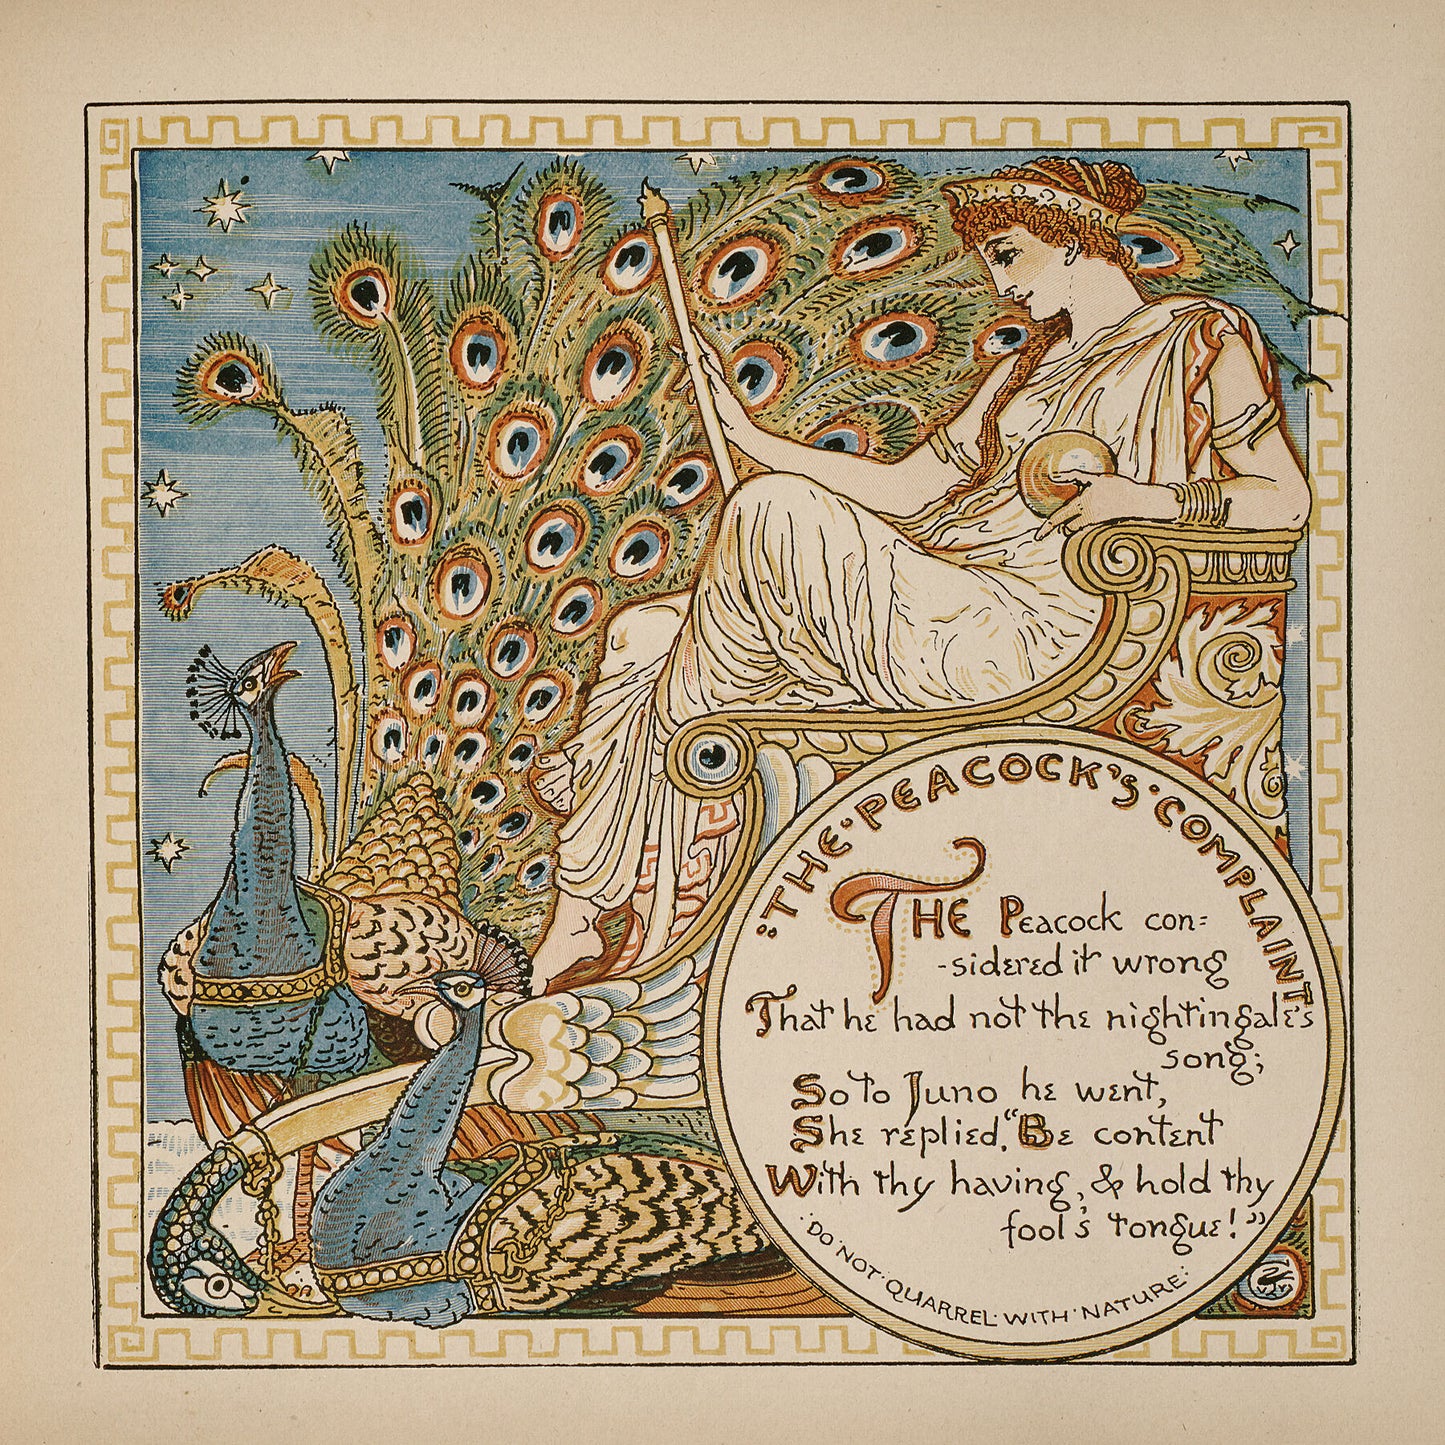 The Peacock's Complaint by Walter Crane - 1887